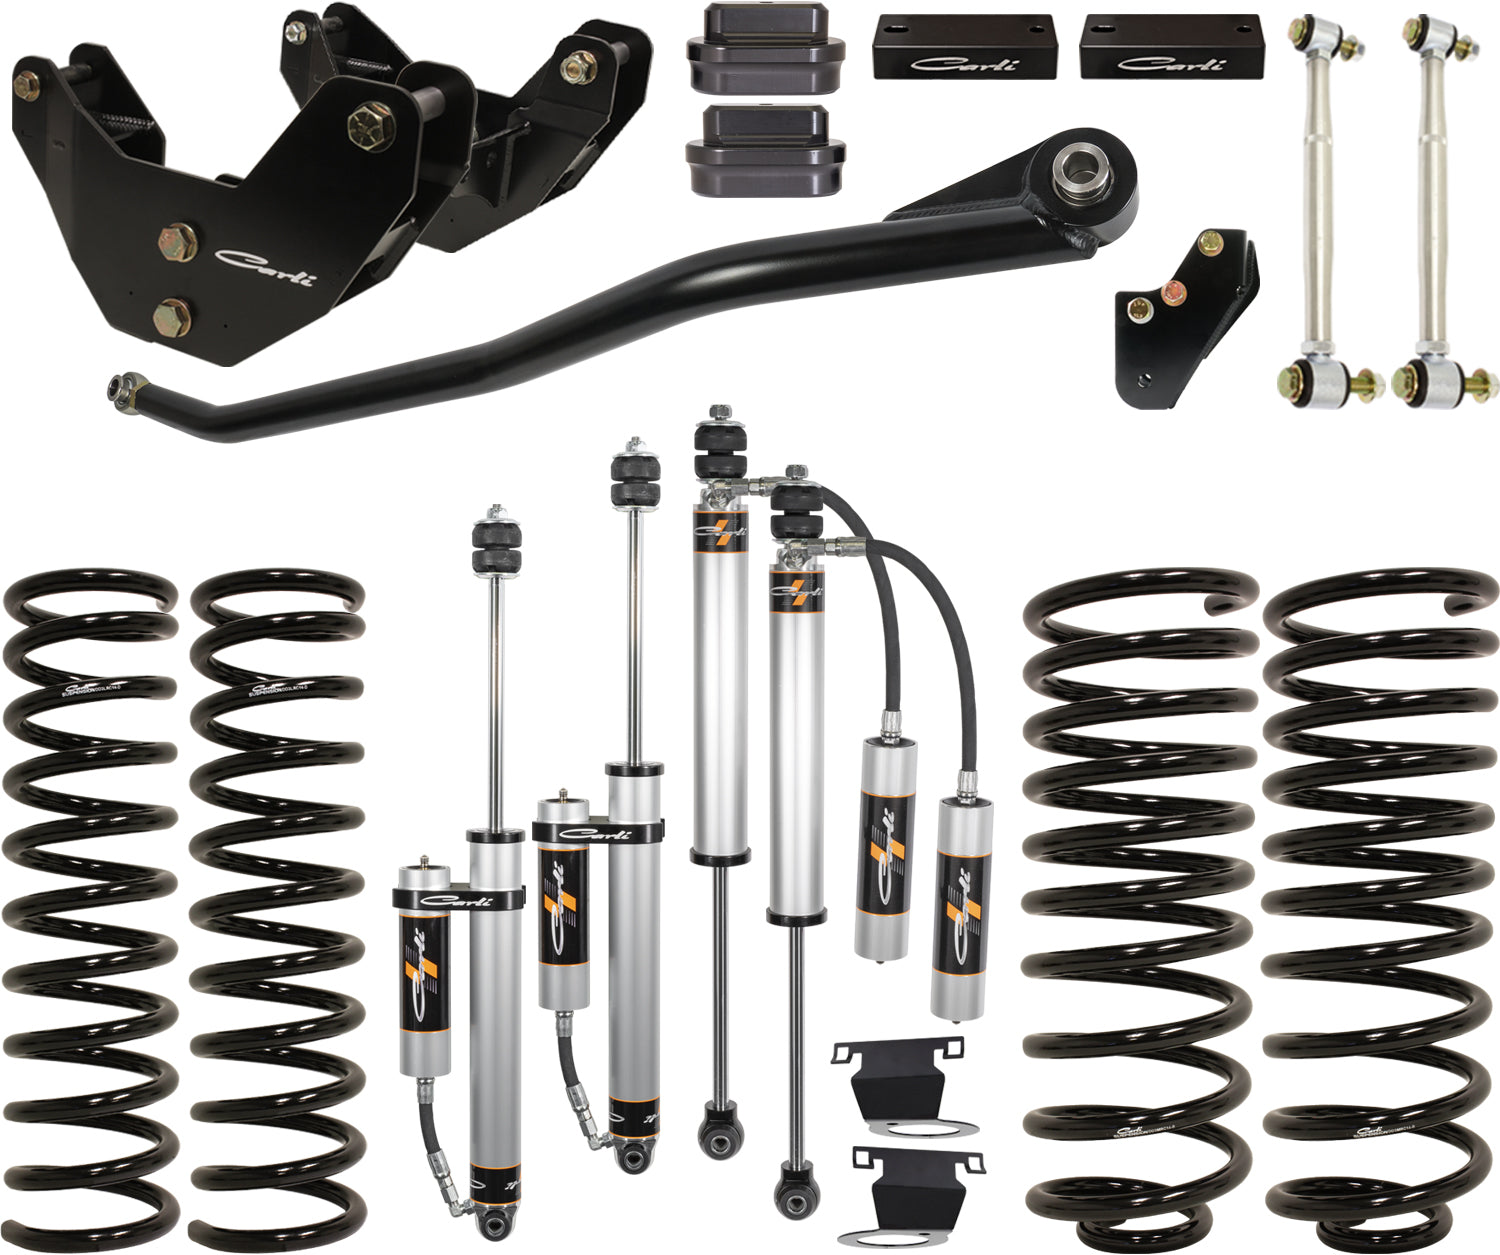 14-22 RAM 2500 4X4 Diesel 3.25" Lift Backcountry System  R2 Coils parts